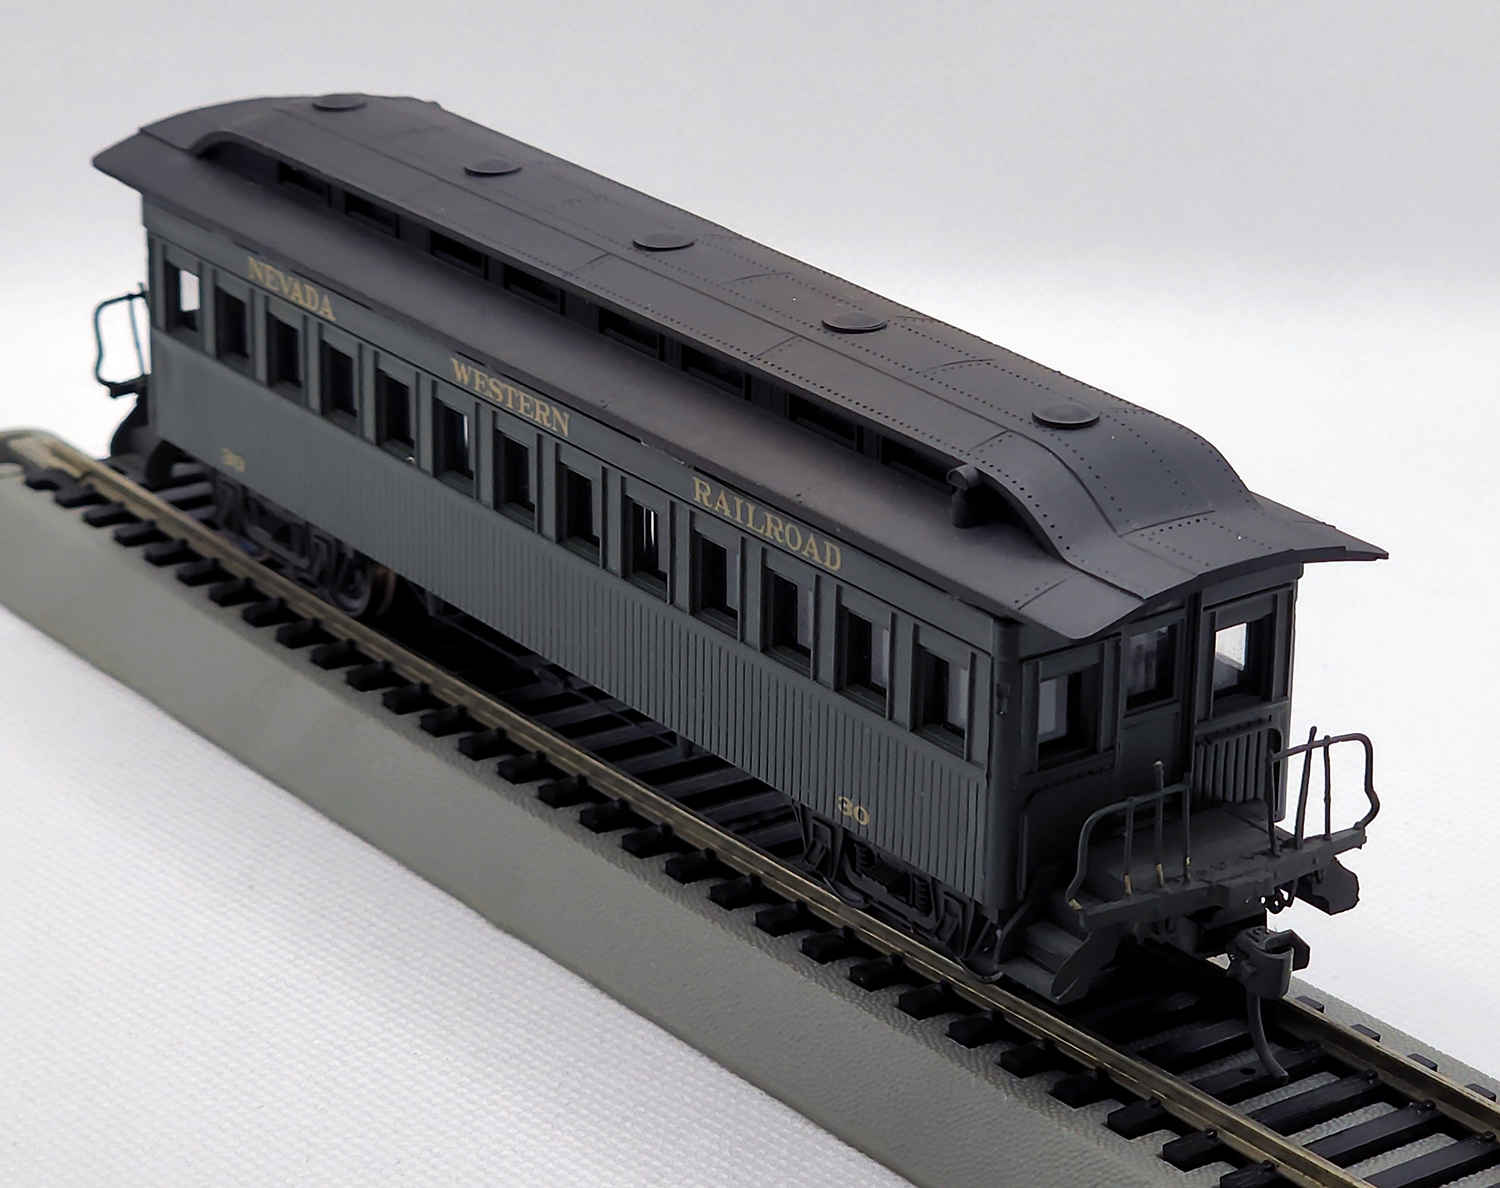 3rd view of the Unbranded Nevada Western Railroad Passenger Coach #30 in my HO-scale Collection